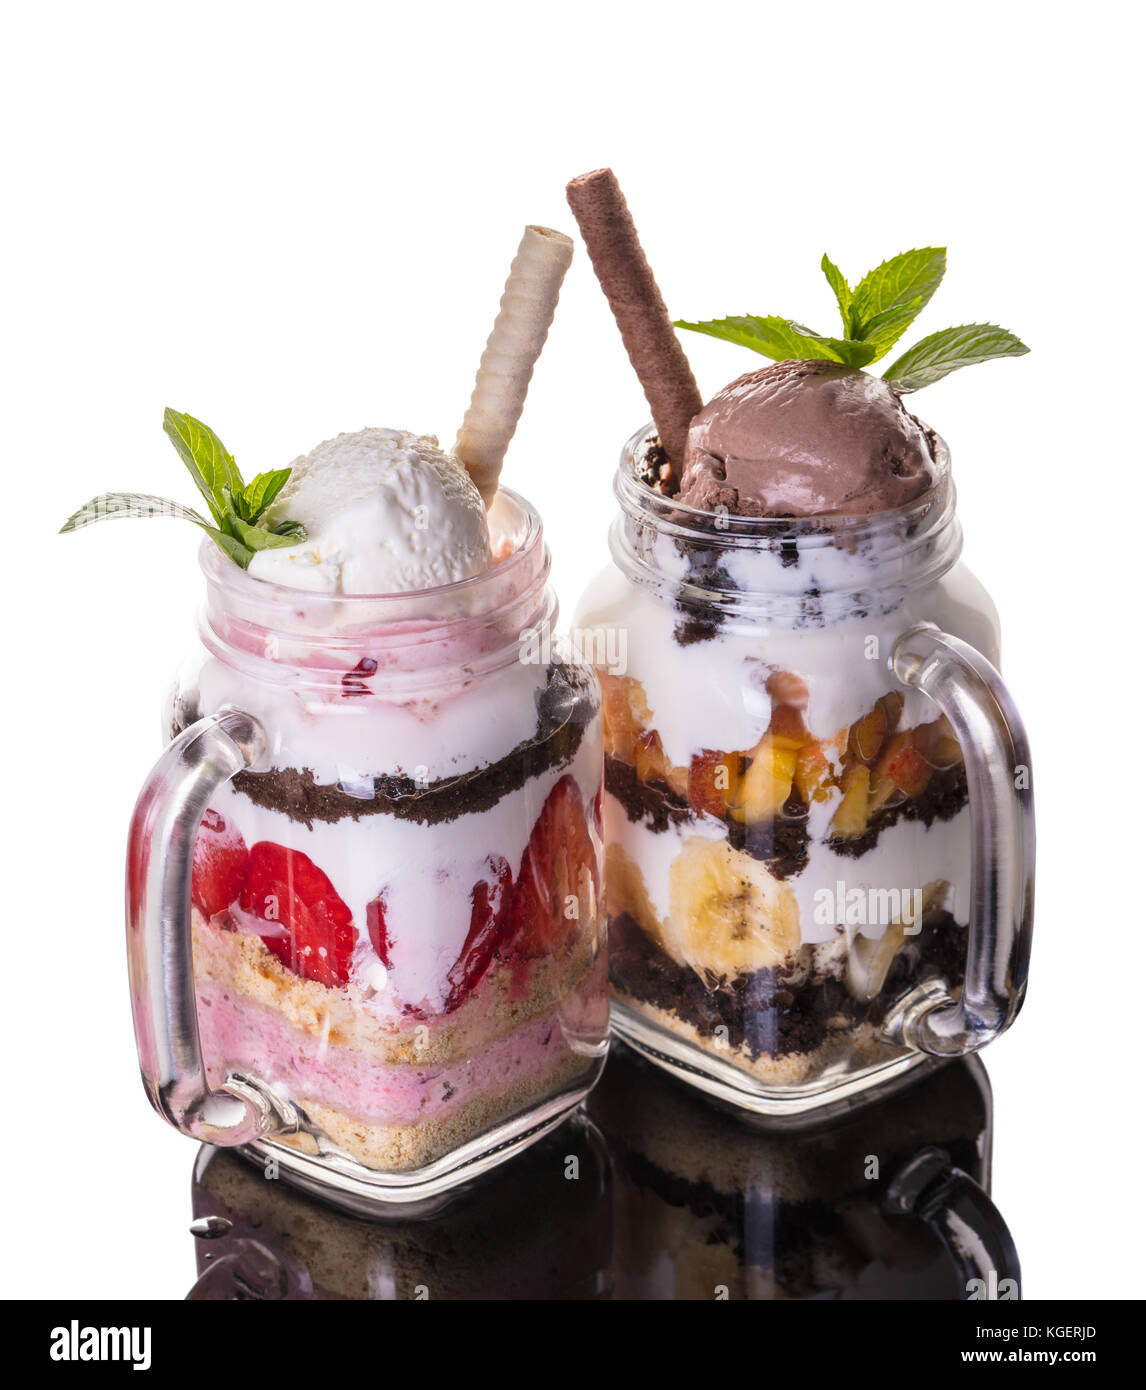 Fruit desserts with ice cream in a glass jar Stock Photo - Alamy